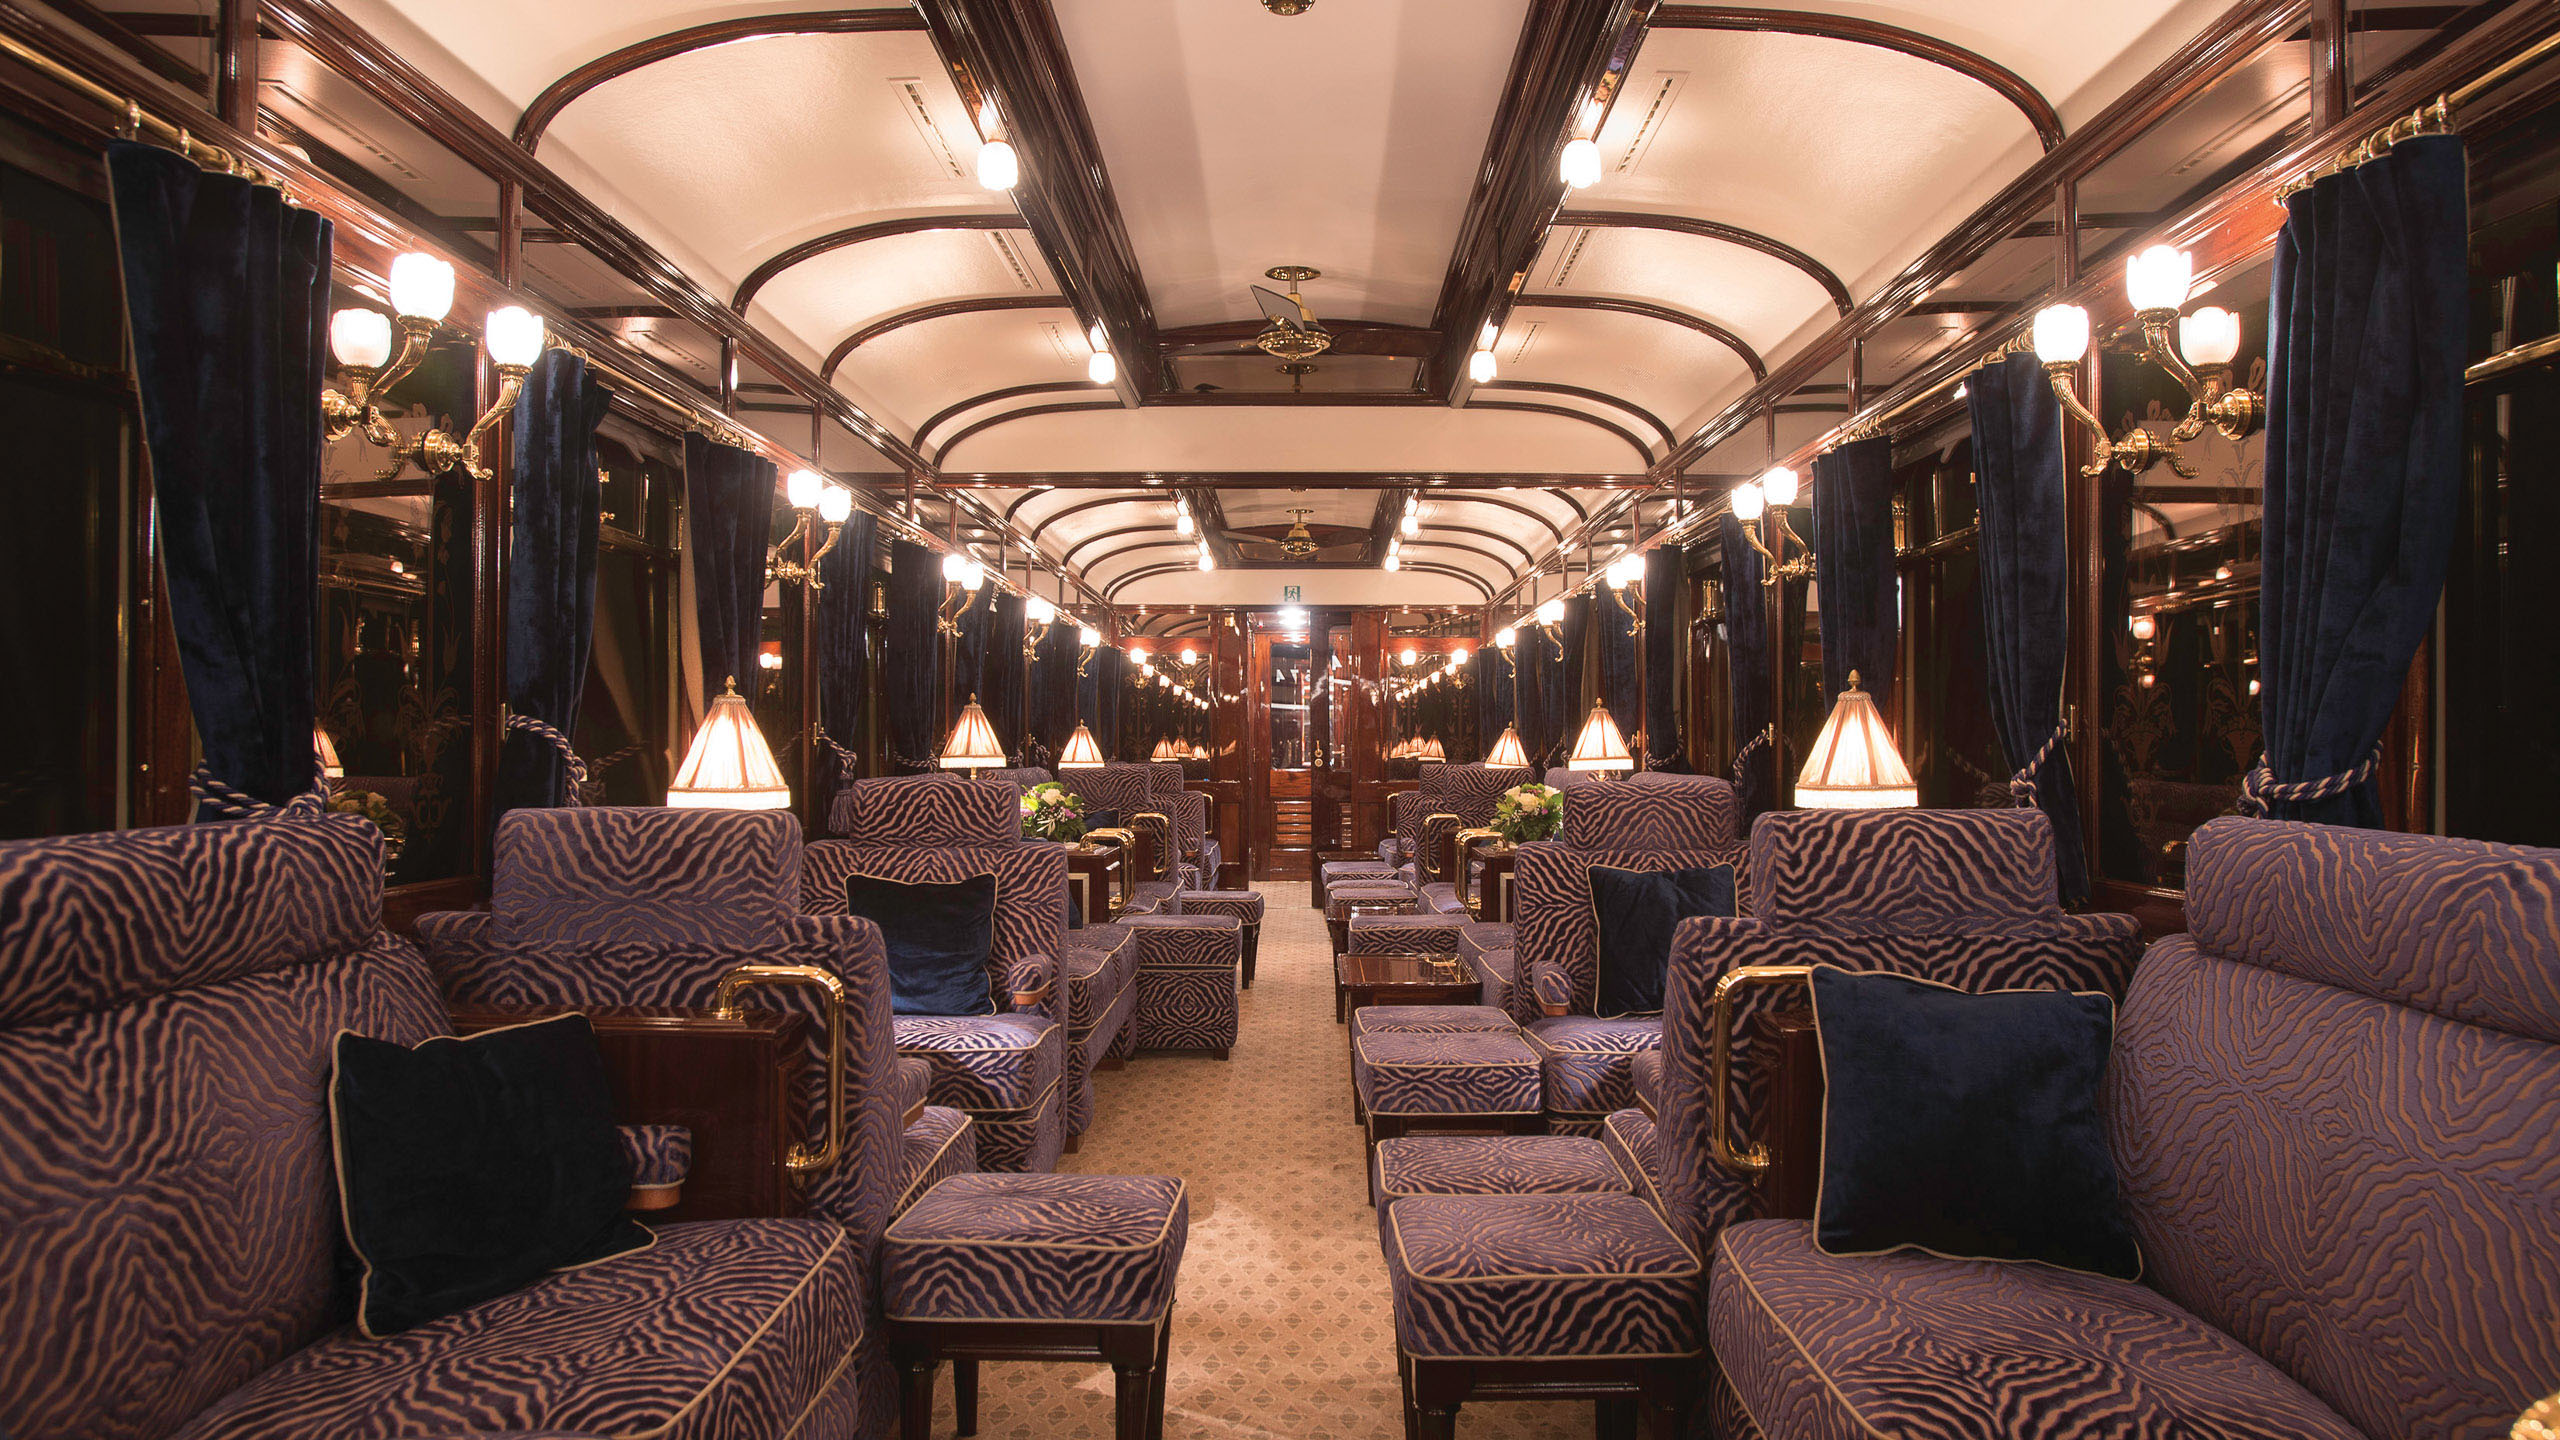 Win a Trip on the Venice Simplon-Orient-Express & Travel from Istanbul